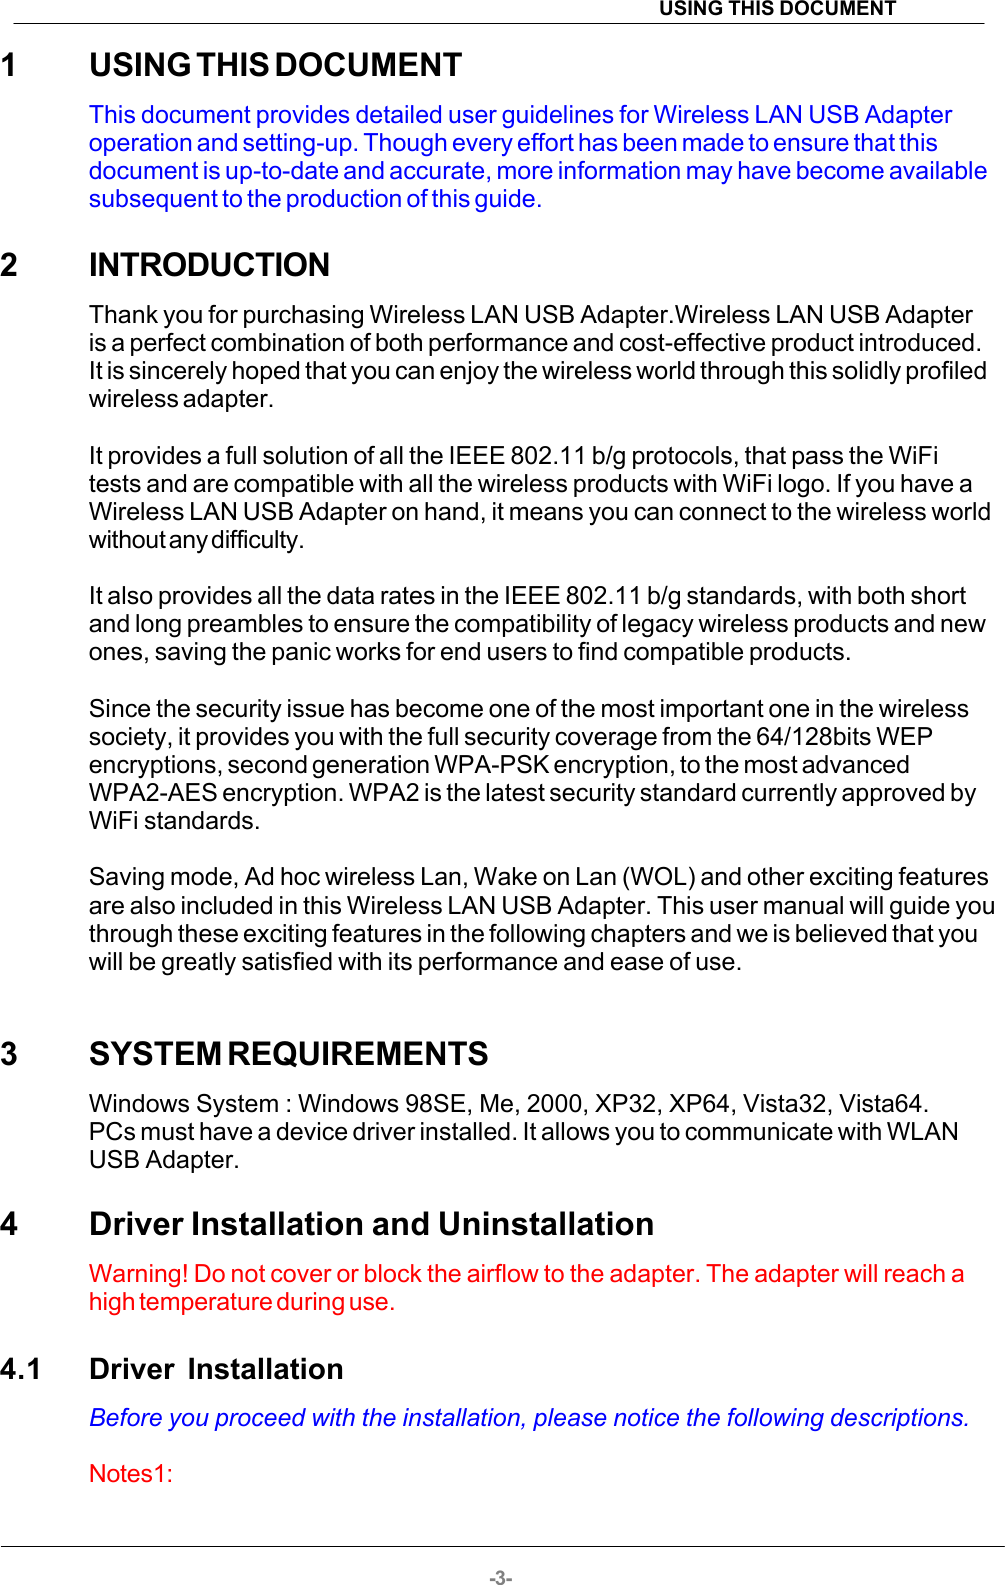 USING THIS DOCUMENT-3-1USING THIS DOCUMENTThis document provides detailed user guidelines for Wireless LAN USB Adapteroperation and setting-up. Though every effort has been made to ensure that thisdocument is up-to-date and accurate, more information may have become availablesubsequent to the production of this guide.2INTRODUCTIONThank you for purchasing Wireless LAN USB Adapter.Wireless LAN USB Adapteris a perfect combination of both performance and cost-effective product introduced.It is sincerely hoped that you can enjoy the wireless world through this solidly profiledwireless adapter.It provides a full solution of all the IEEE 802.11 b/g protocols, that pass the WiFitests and are compatible with all the wireless products with WiFi logo. If you have aWireless LAN USB Adapter on hand, it means you can connect to the wireless worldwithout any difficulty.It also provides all the data rates in the IEEE 802.11 b/g standards, with both shortand long preambles to ensure the compatibility of legacy wireless products and newones, saving the panic works for end users to find compatible products.Since the security issue has become one of the most important one in the wirelesssociety, it provides you with the full security coverage from the 64/128bits WEPencryptions, second generation WPA-PSK encryption, to the most advancedWPA2-AES encryption. WPA2 is the latest security standard currently approved byWiFi standards.Saving mode, Ad hoc wireless Lan, Wake on Lan (WOL) and other exciting featuresare also included in this Wireless LAN USB Adapter. This user manual will guide youthrough these exciting features in the following chapters and we is believed that youwill be greatly satisfied with its performance and ease of use.3SYSTEM REQUIREMENTSWindows System : Windows 98SE, Me, 2000, XP32, XP64, Vista32, Vista64.PCs must have a device driver installed. It allows you to communicate with WLANUSB Adapter.4Driver Installation and UninstallationWarning! Do not cover or block the airflow to the adapter. The adapter will reach ahigh temperature during use.4.1 Driver InstallationBefore you proceed with the installation, please notice the following descriptions.Notes1: